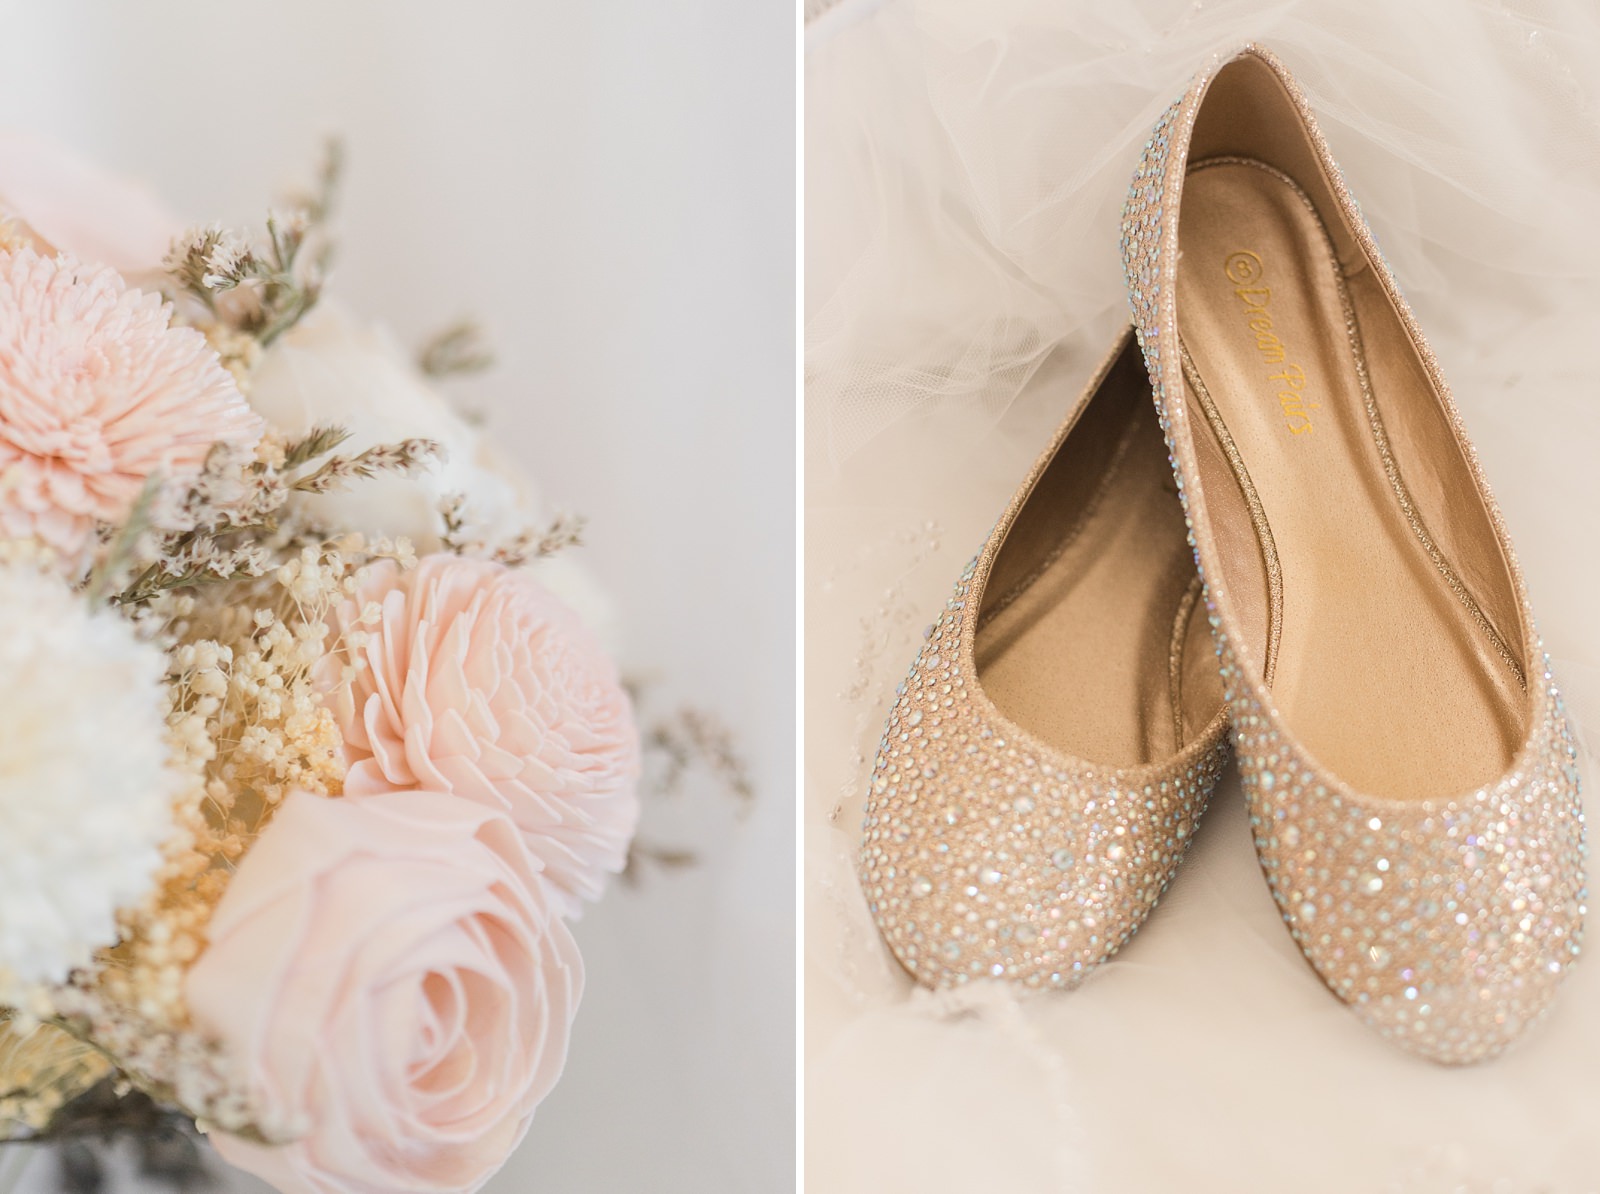 Disney Themed Arden Hills Wedding by Oh Snap! Photography